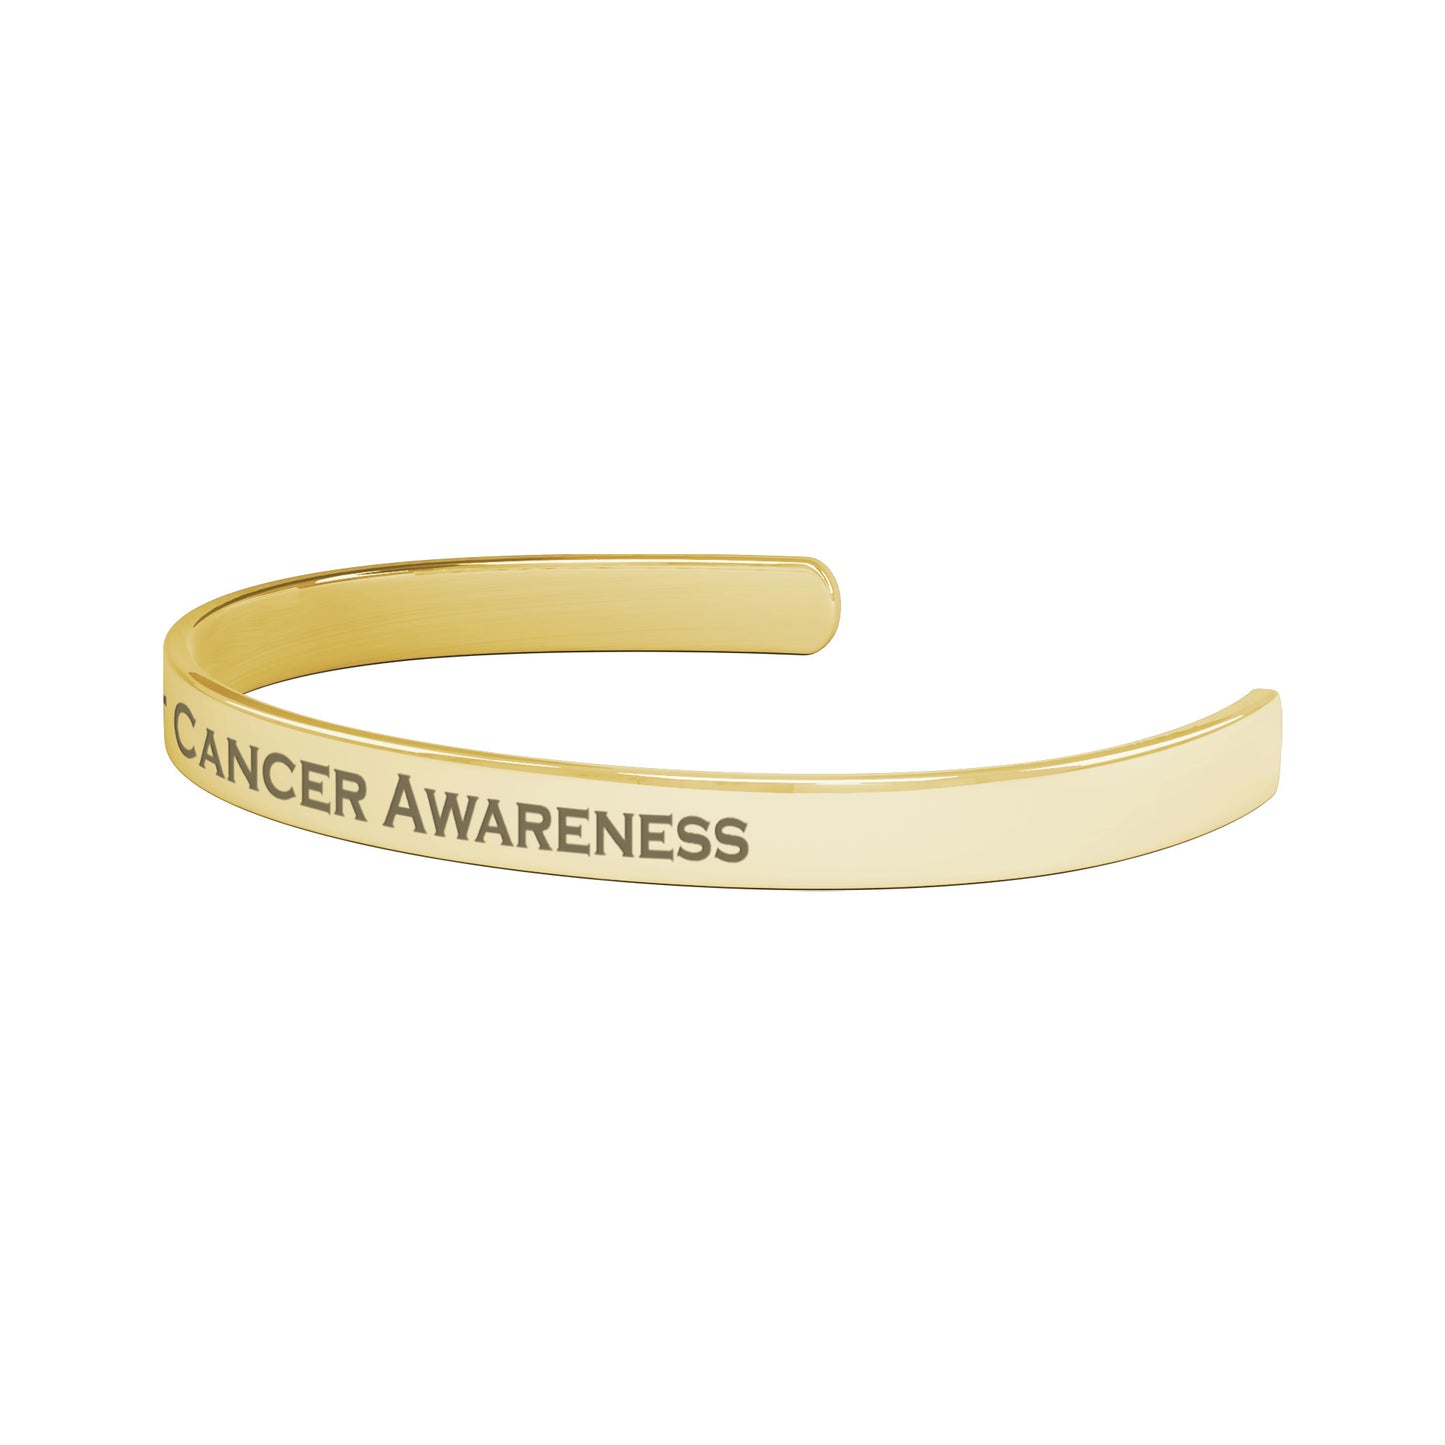 Personalized Breast Cancer Awareness Cuff Bracelet